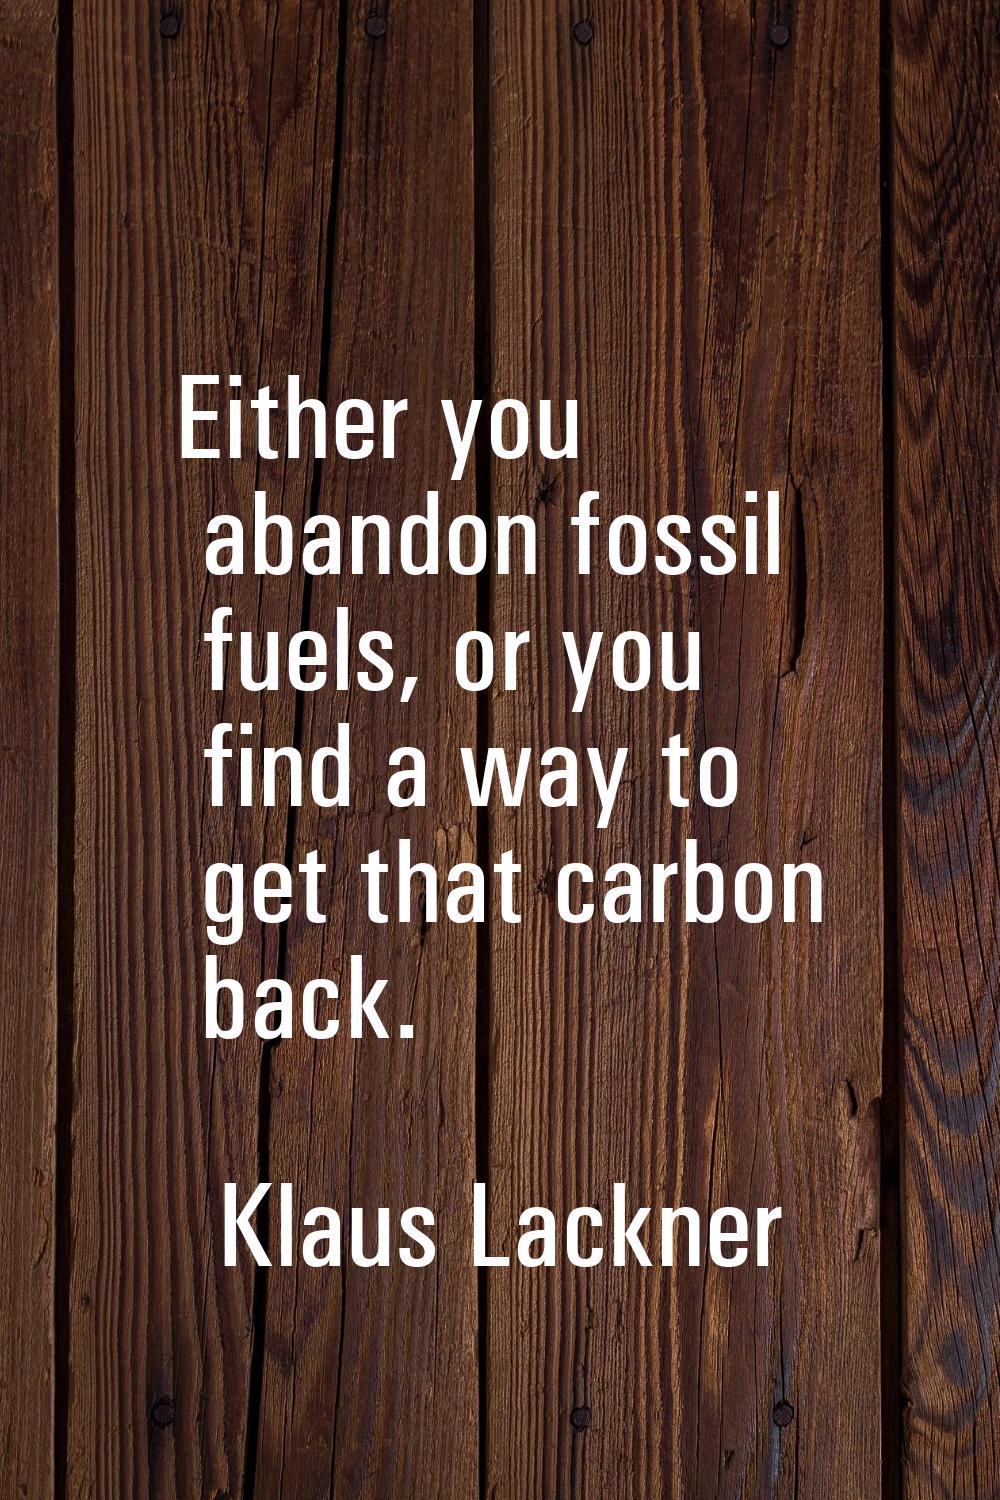 Either you abandon fossil fuels, or you find a way to get that carbon back.